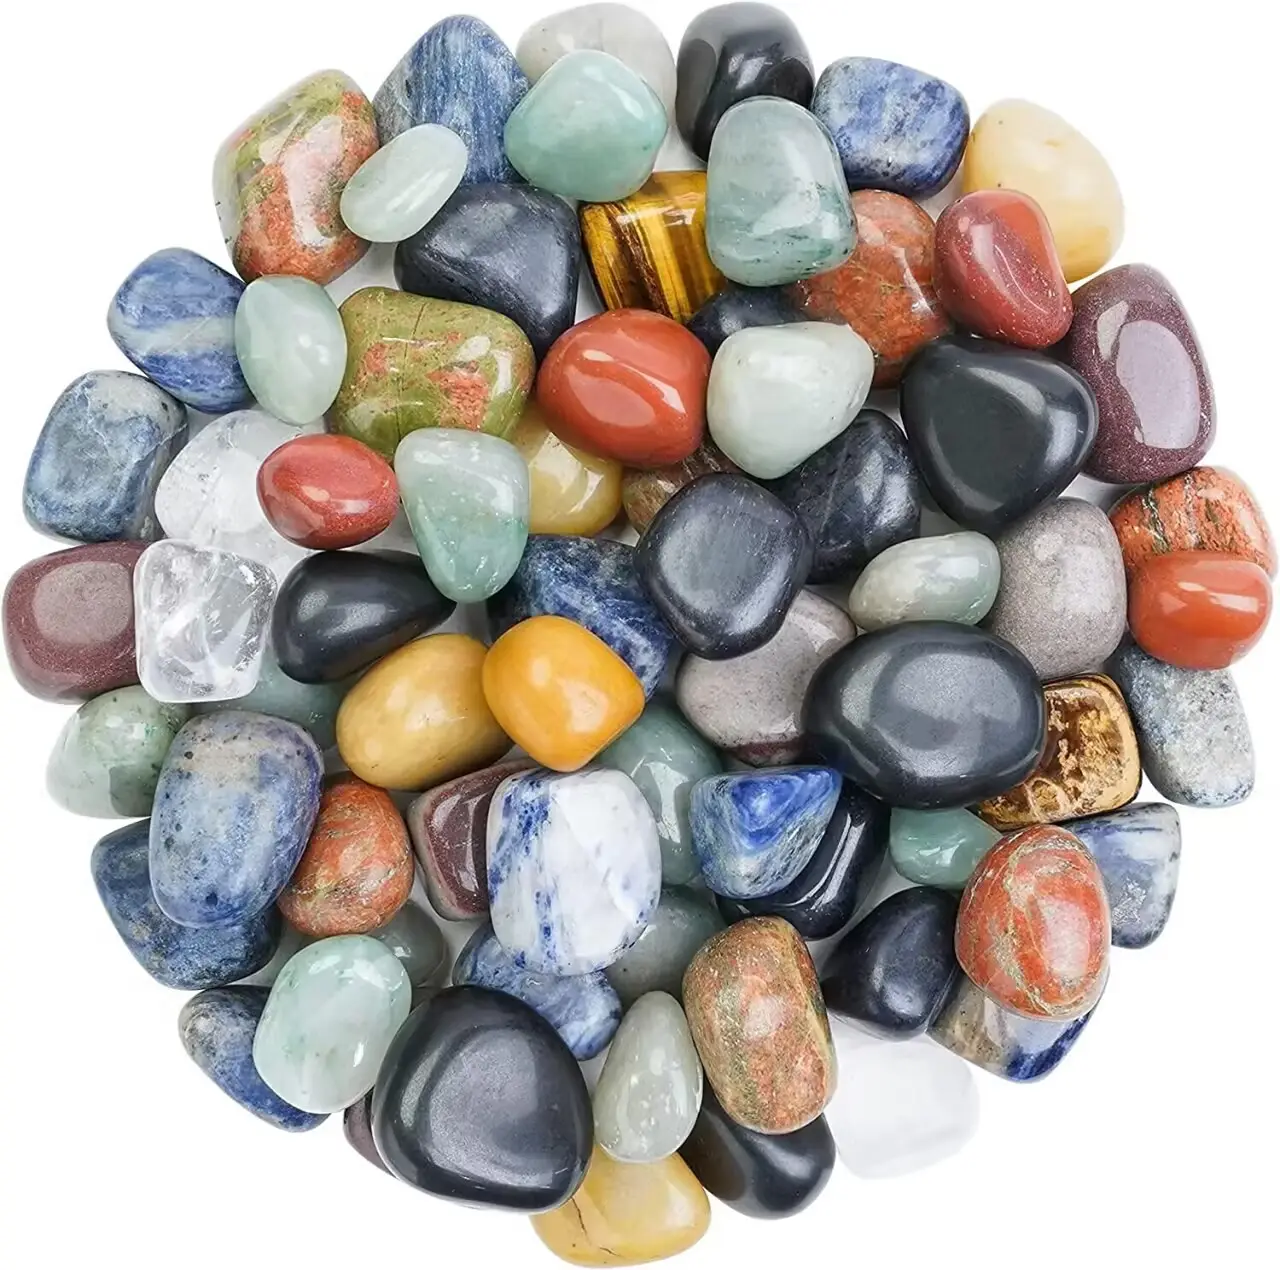 Polished Tumbled Stones And Healing Crystals Bulk Rocks Gem Stones for Tumbling Home Decoration Reiki Gifts Therapy Beginners